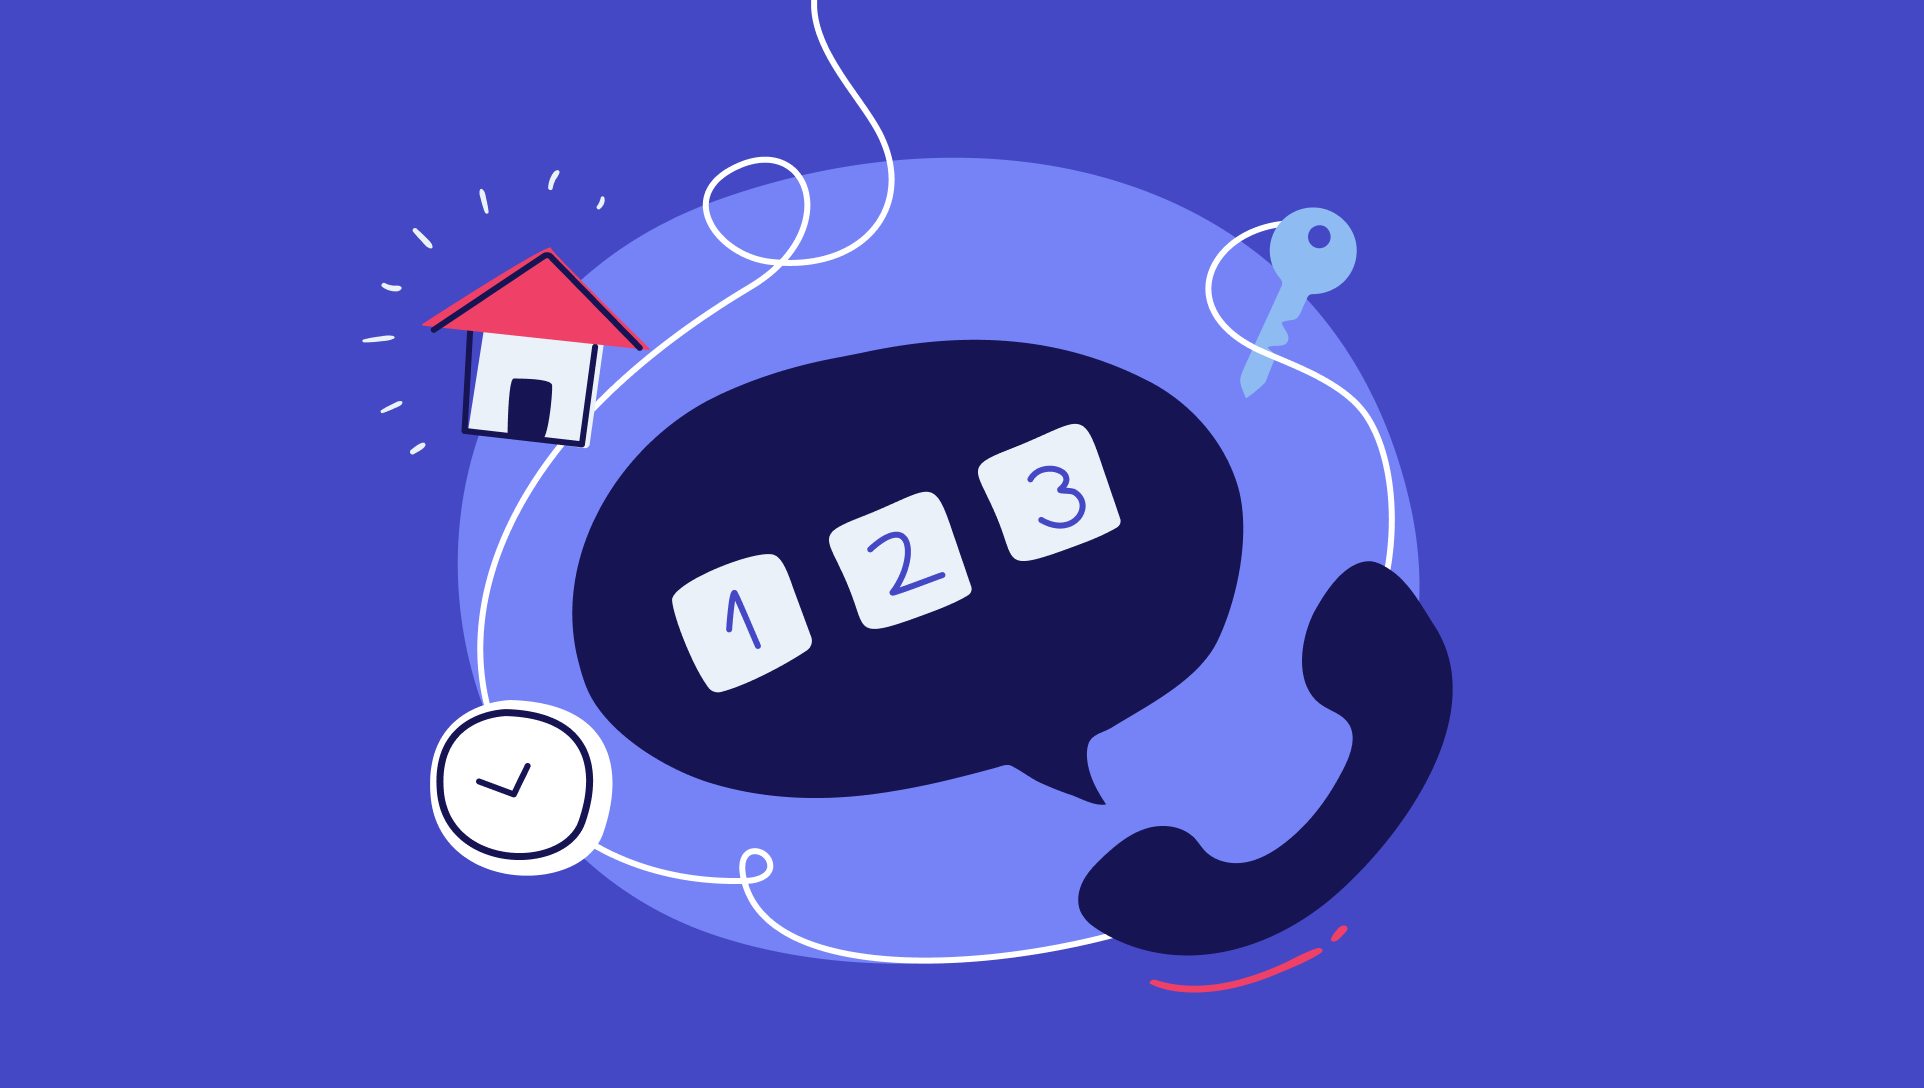 Replacing Outdated IVRs In Real Estate With Conversational AI